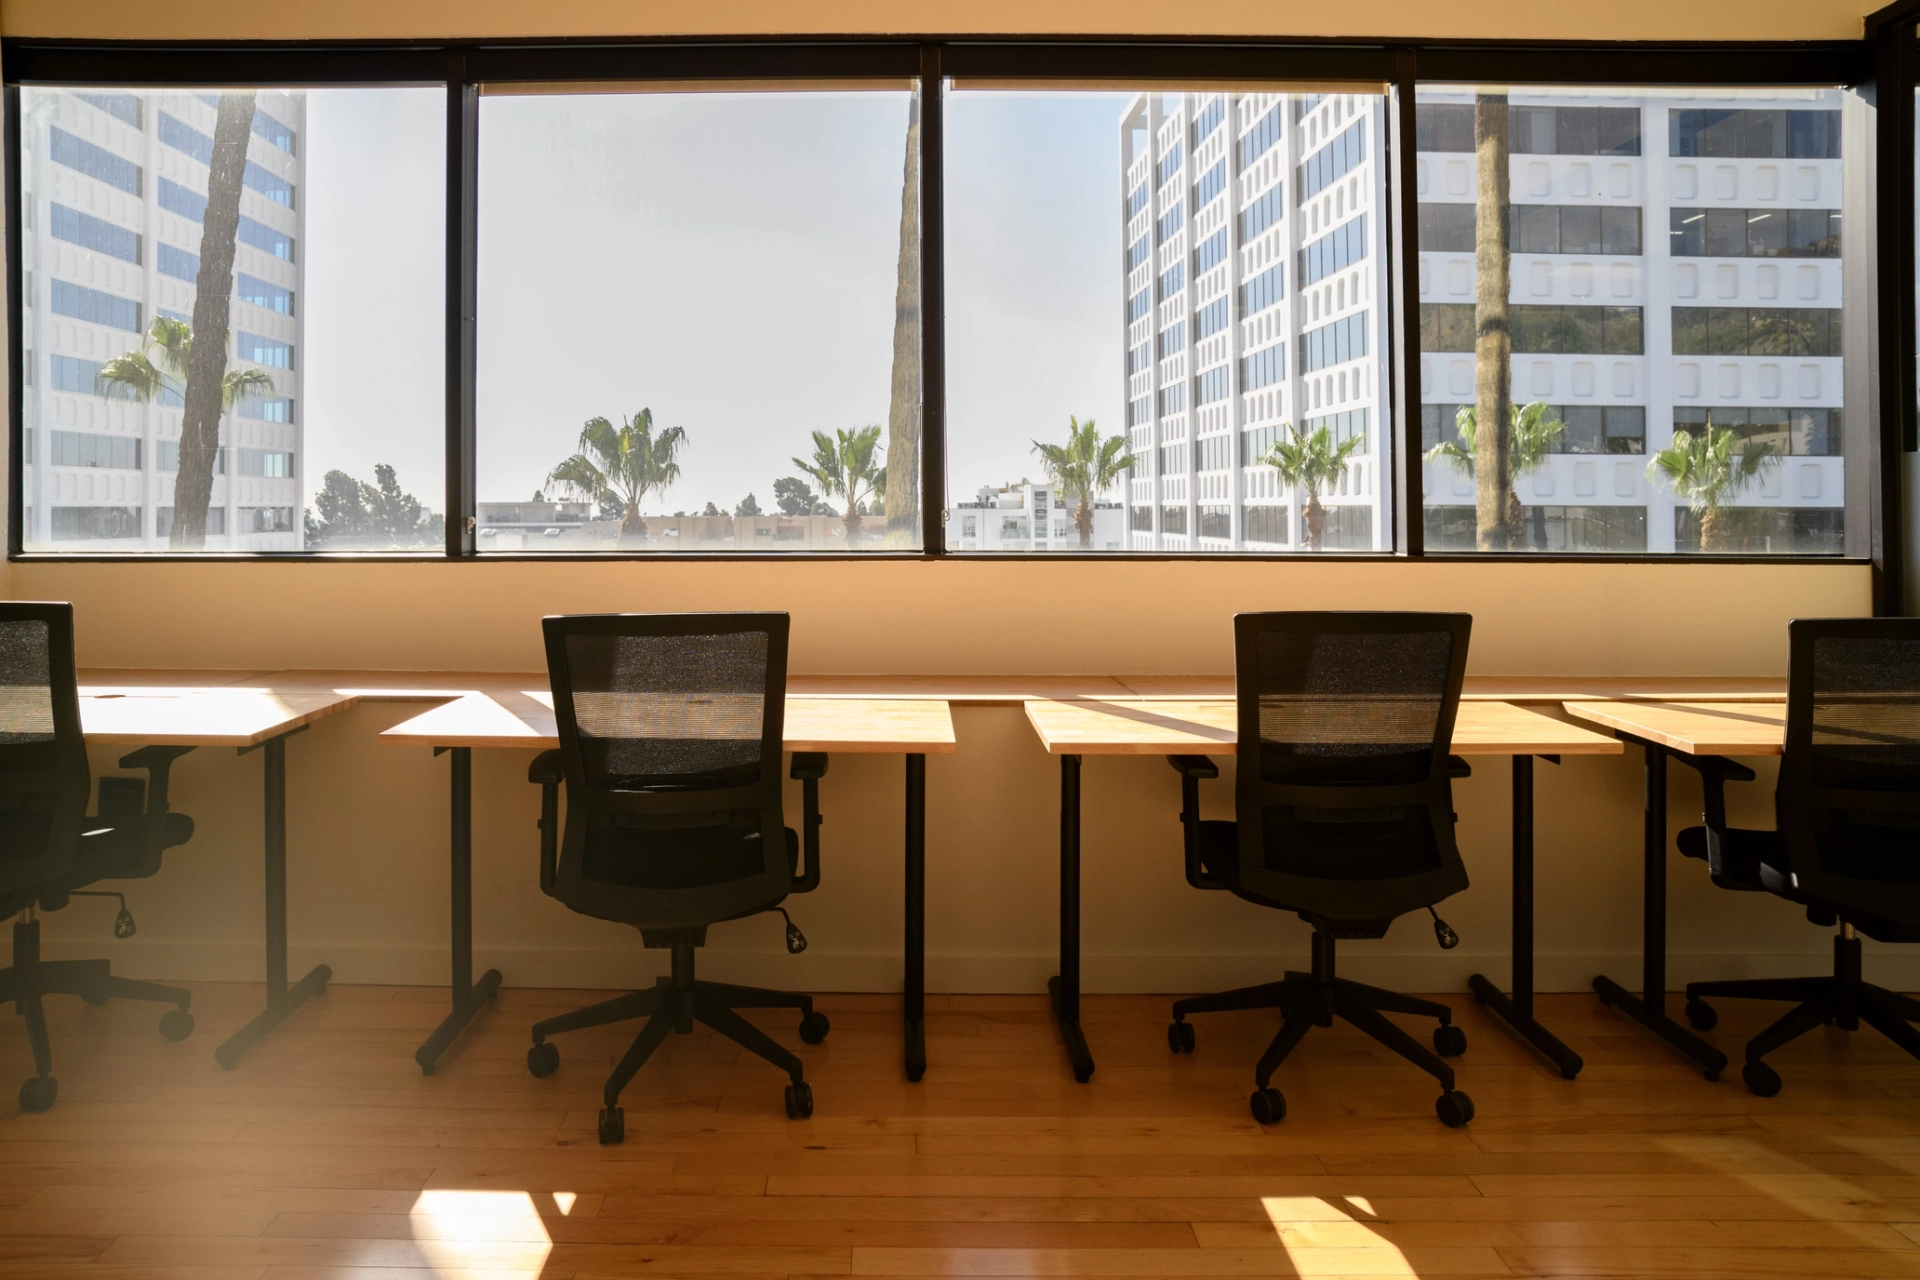 A coworking office with large windows and desks arranged in a row.